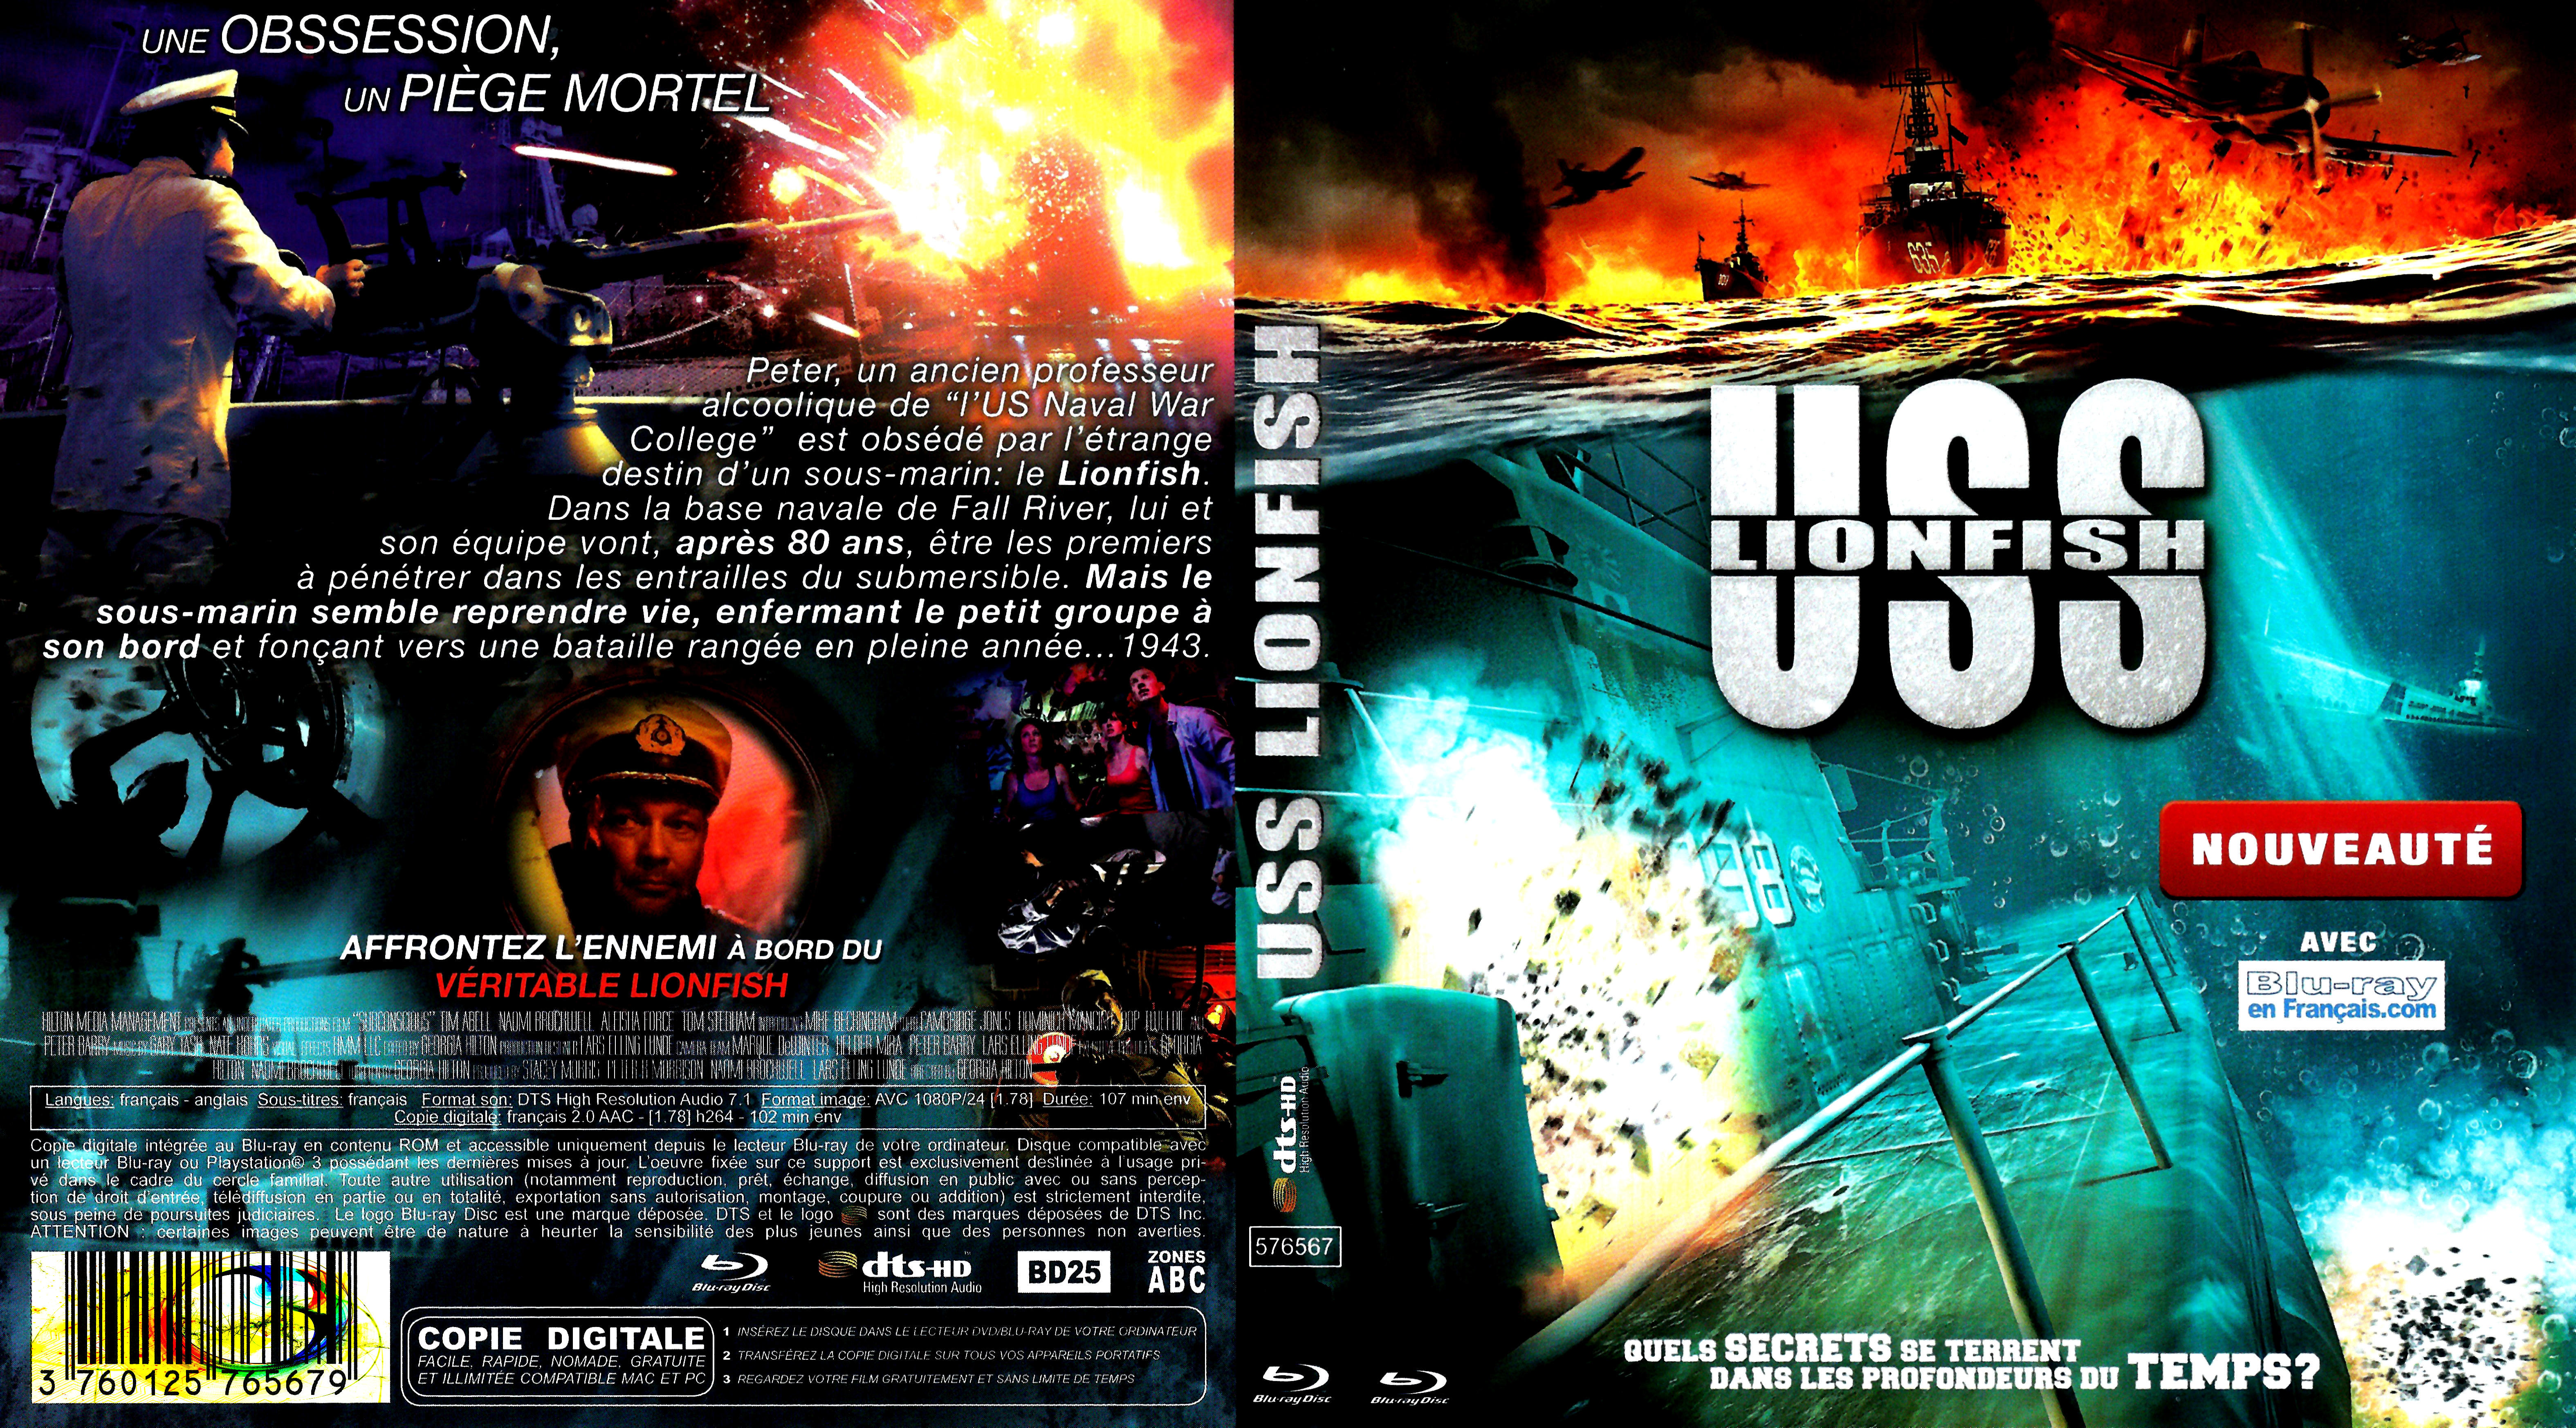 Jaquette DVD Uss lionfish (BLU-RAY)